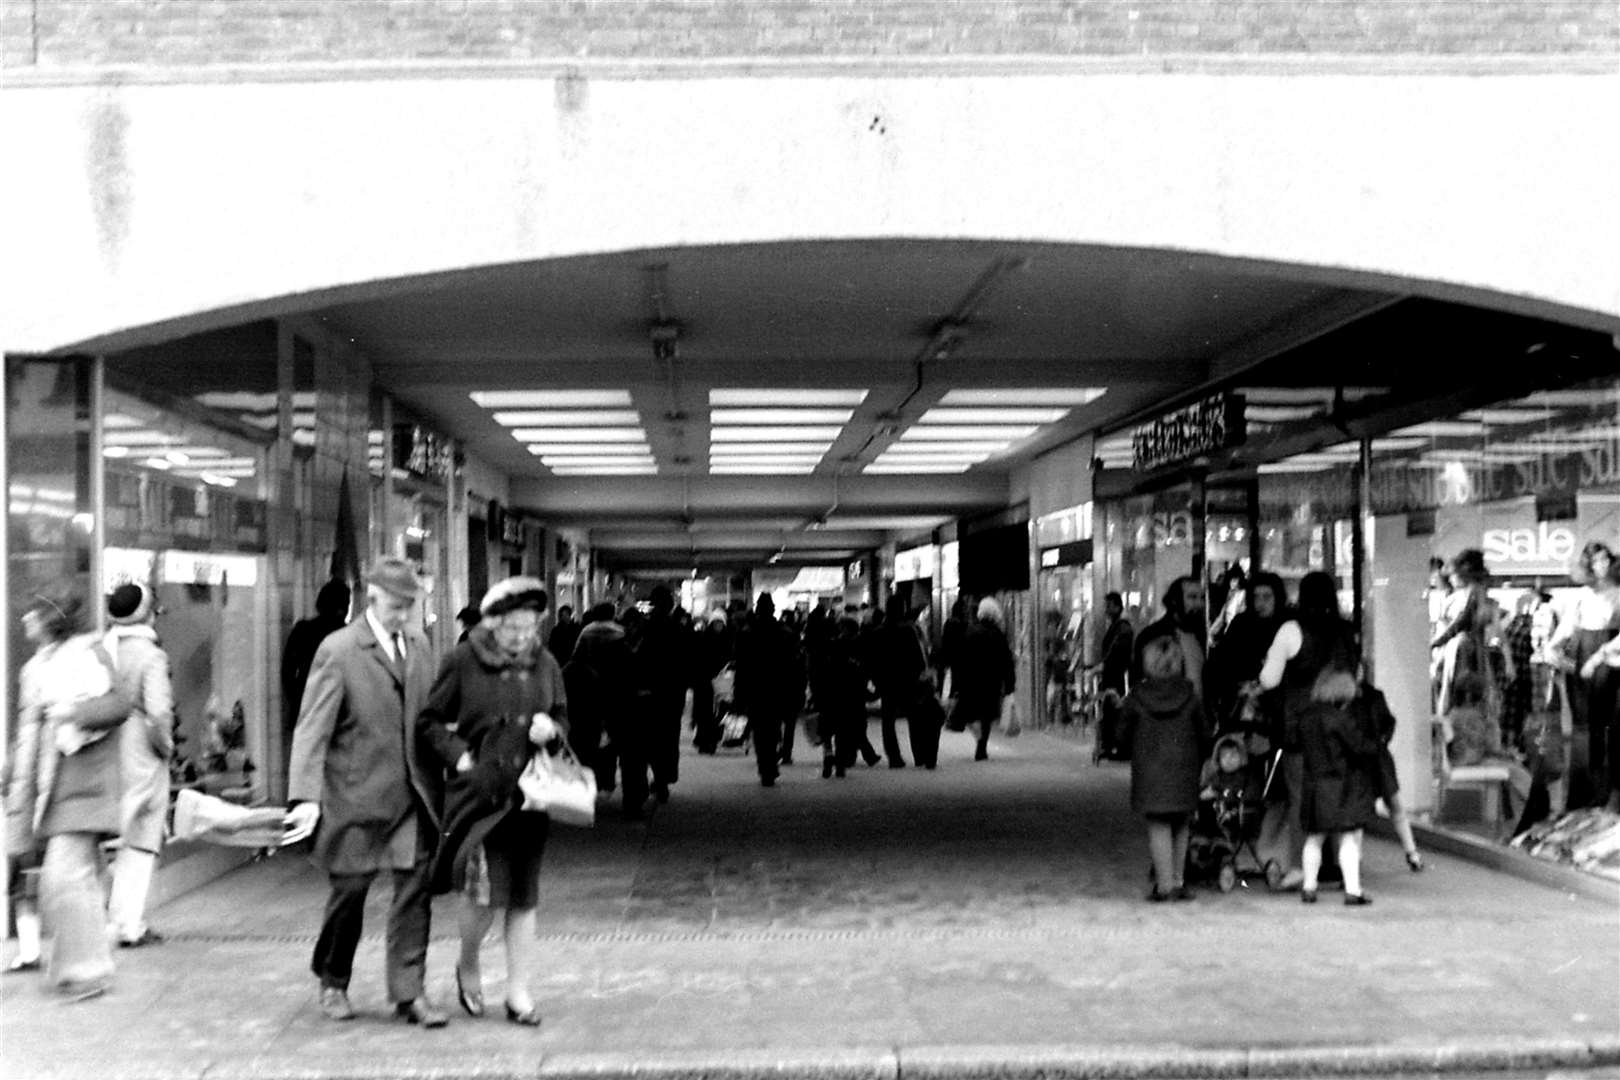 1975: The original High Street entrance to the open-aired Tufton Centre (now County Square) illustrating a bustling mall in the mid-seventies